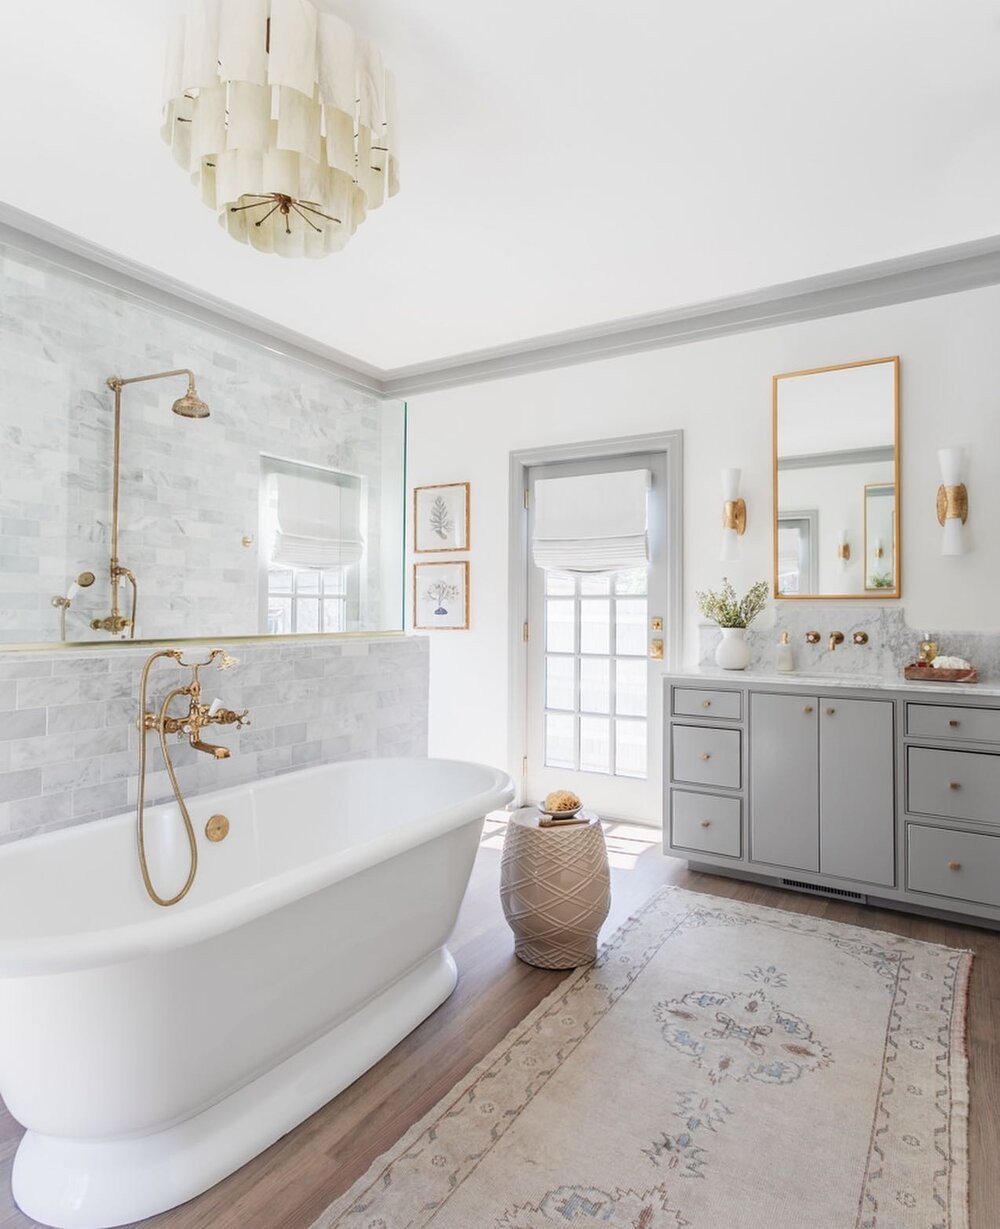 It's been a while since I posted my dream bathroom, but I haven't forgotten her. ✨

Design&bull; @browninteriorsinc 
Photography&bull; @emilyhartphoto 

.
.
.

#your405
#mystofferhomestyle
#studiomcgee
#smmakelifebeautiful
#oklahomadesigner
#thewhole